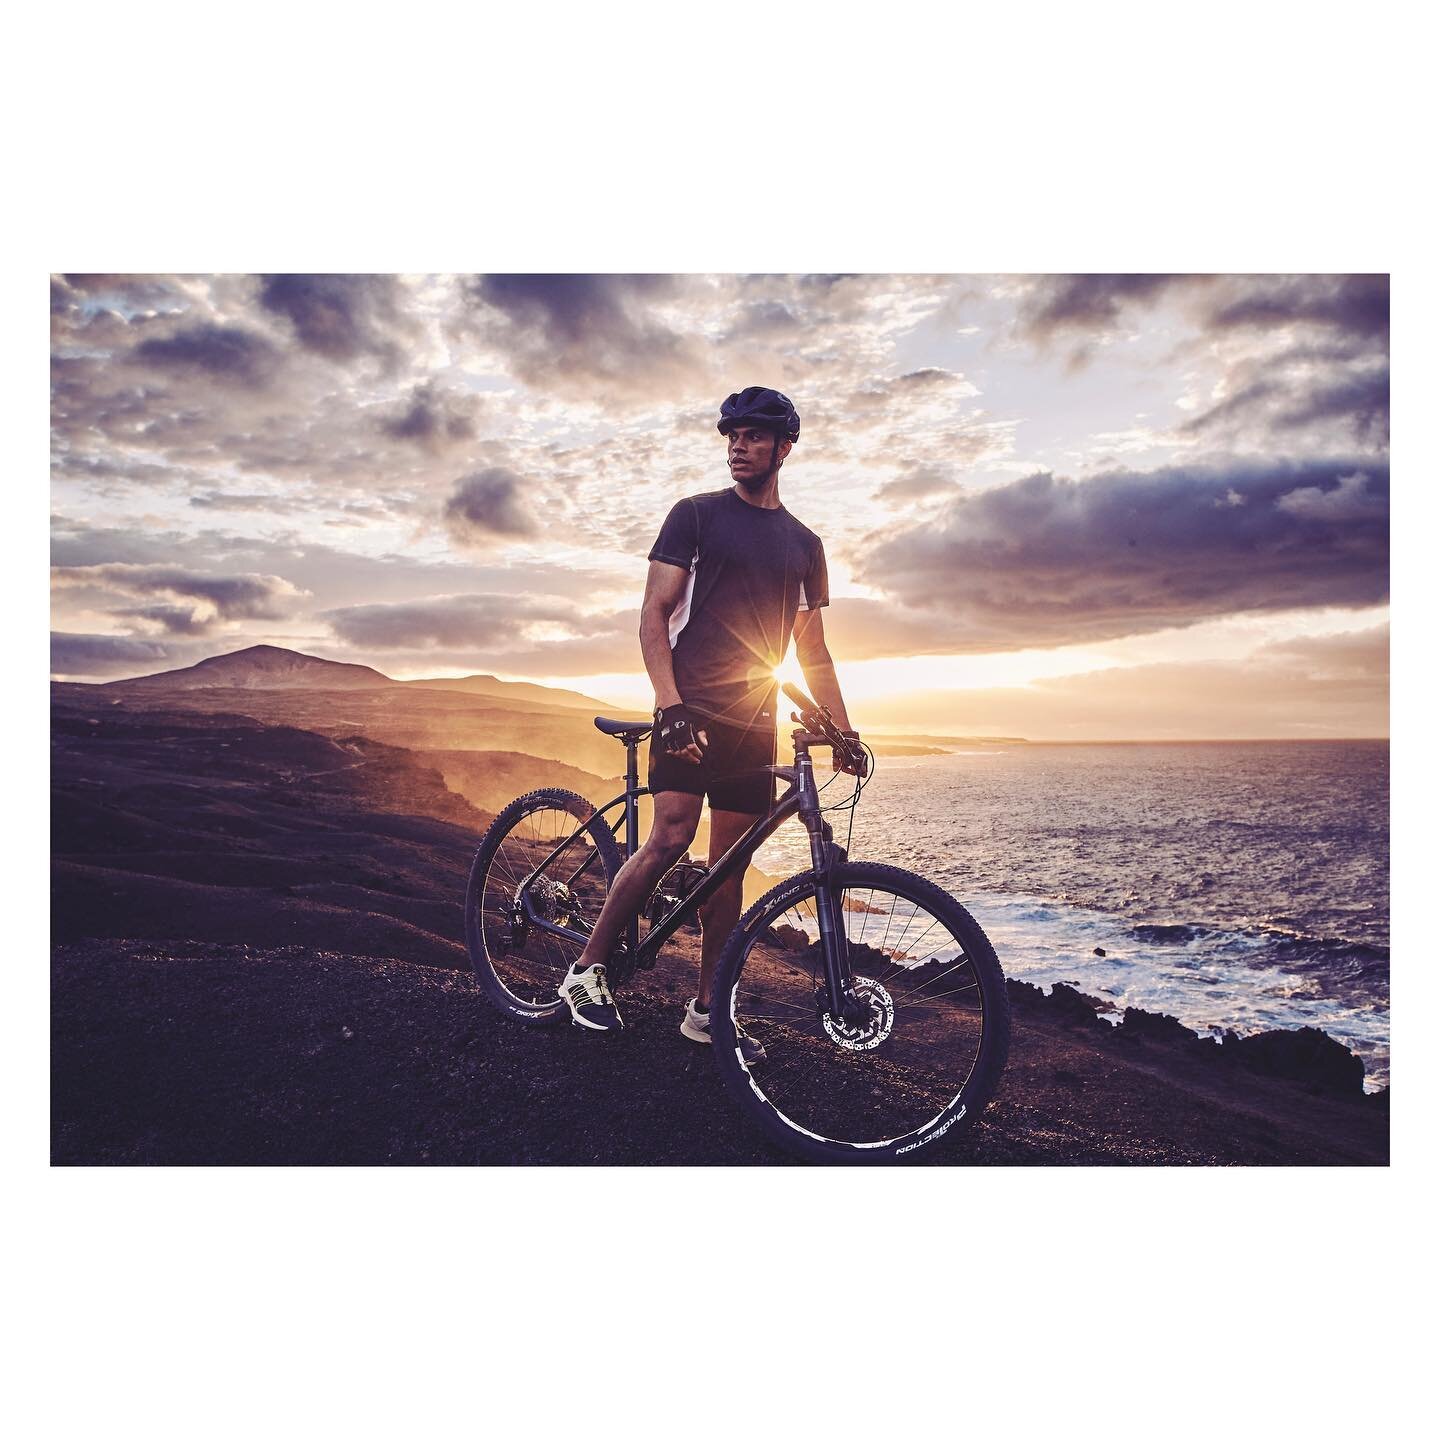 An image from a recent trip to Lanzerote for Spring/Summer 22 campaign. Amazing team, tough conditions but some great results &hellip;.
.
.
.
.
#sustainablefashion #cycling #caneries #bikes #cycle #cyclelife #cyclist #cycletouring #fashionshoot #spor